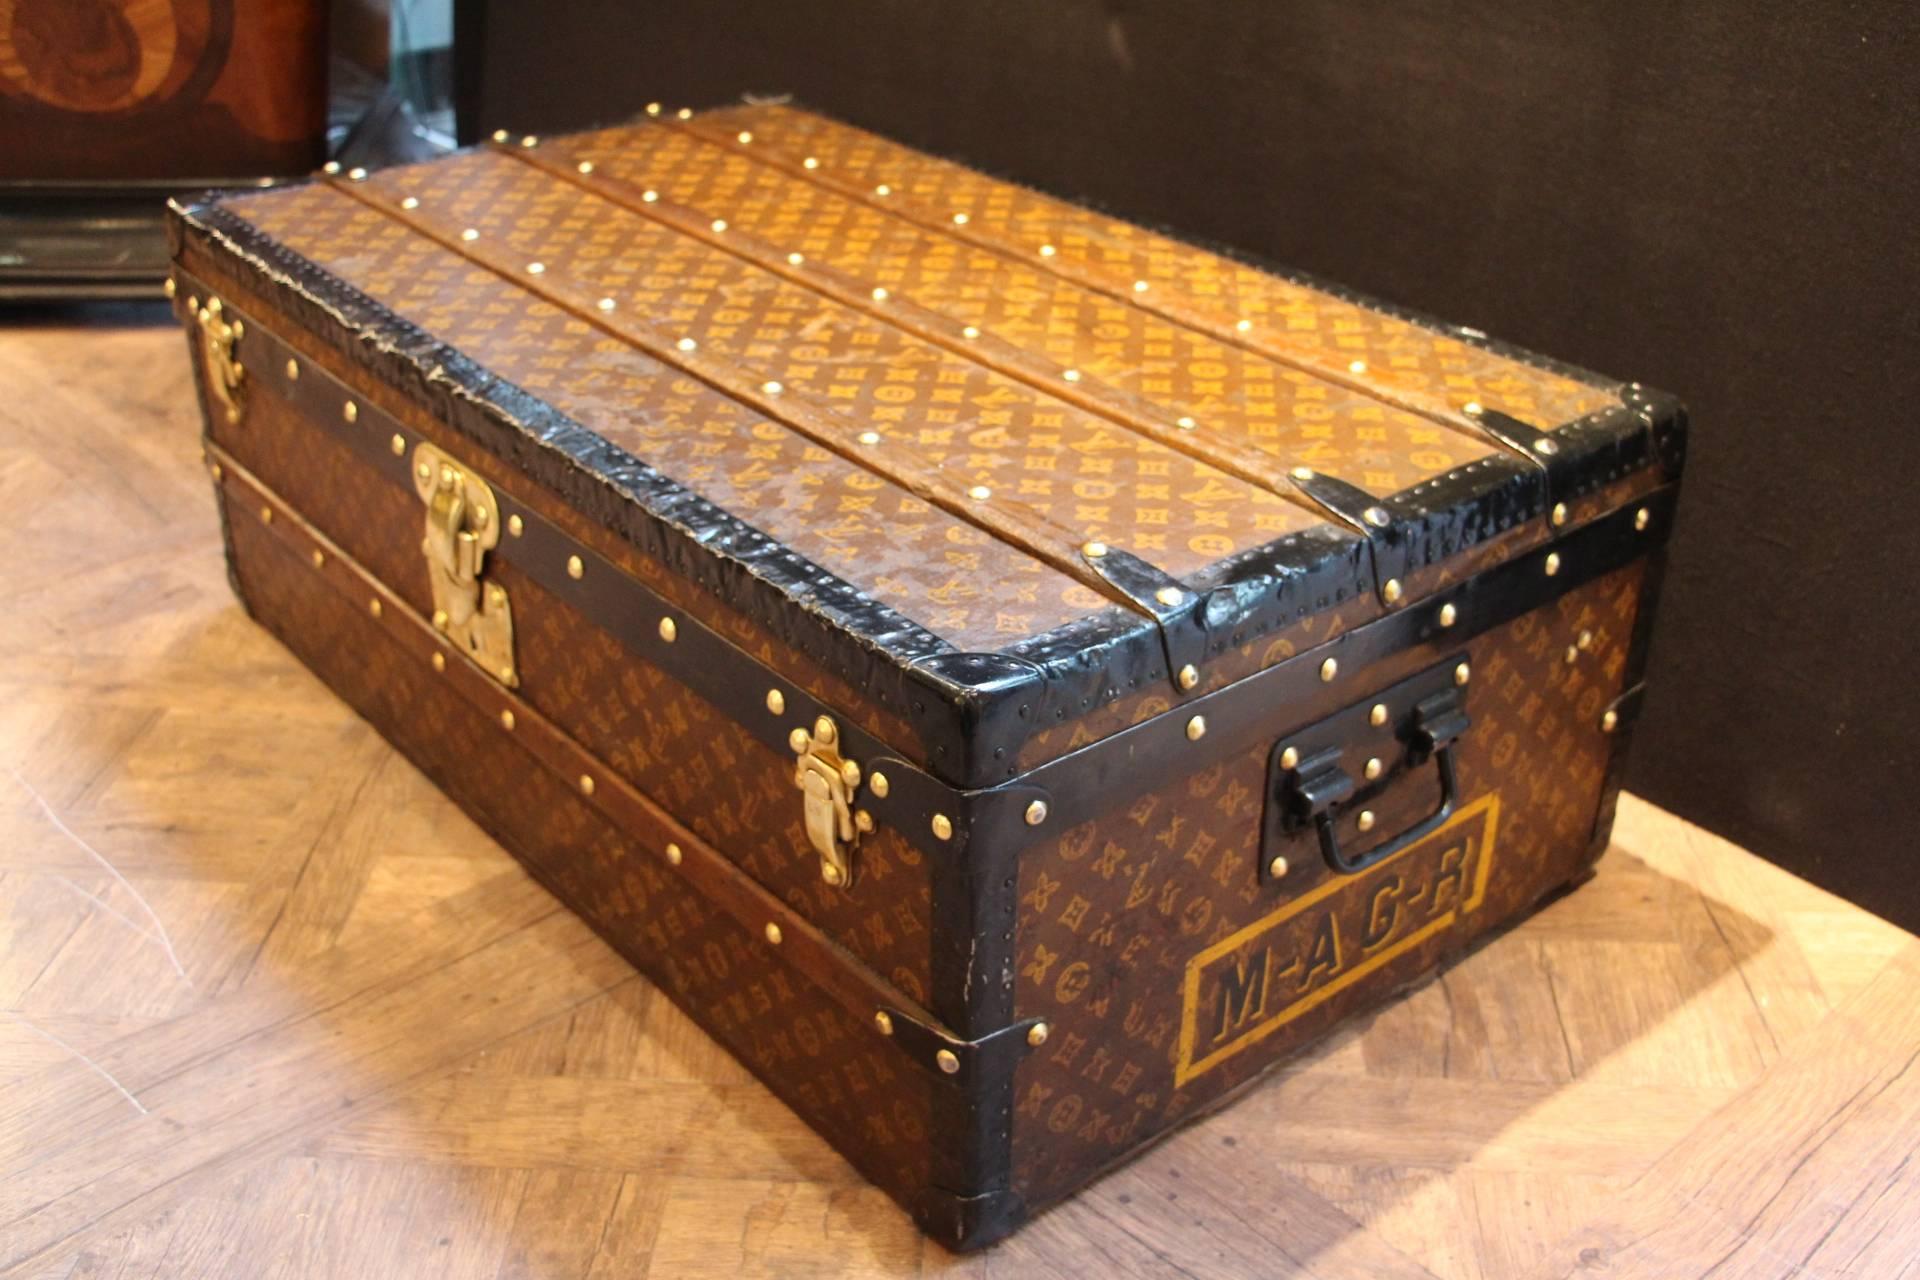 Louis Vuitton steamer trunk featuring stenciled monogram canvas, steel trim and side handles, Brass clasps, lock and stamped studs. Superb warm patina.
Its interior has been perfectly relined a while ago exactly like the original used to be. Clean